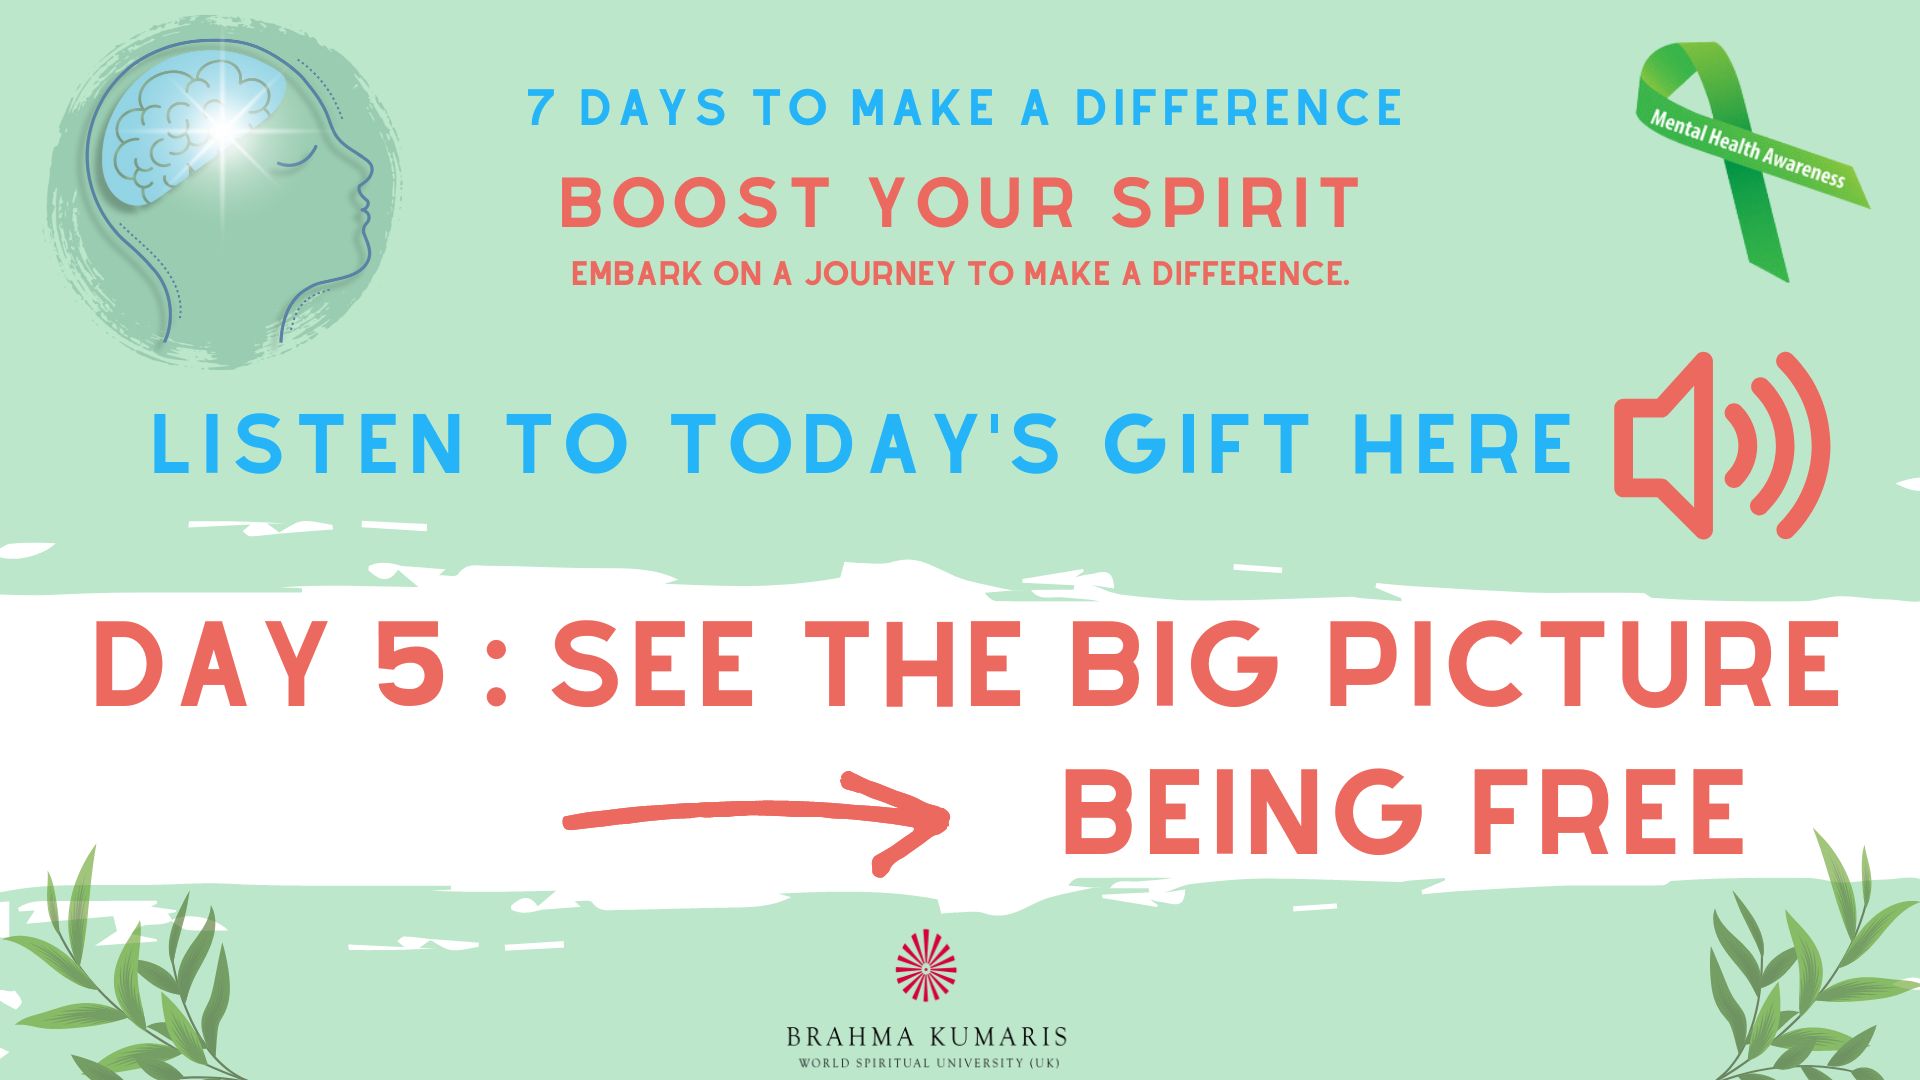 Day 5: See The Big Picture - Being Free